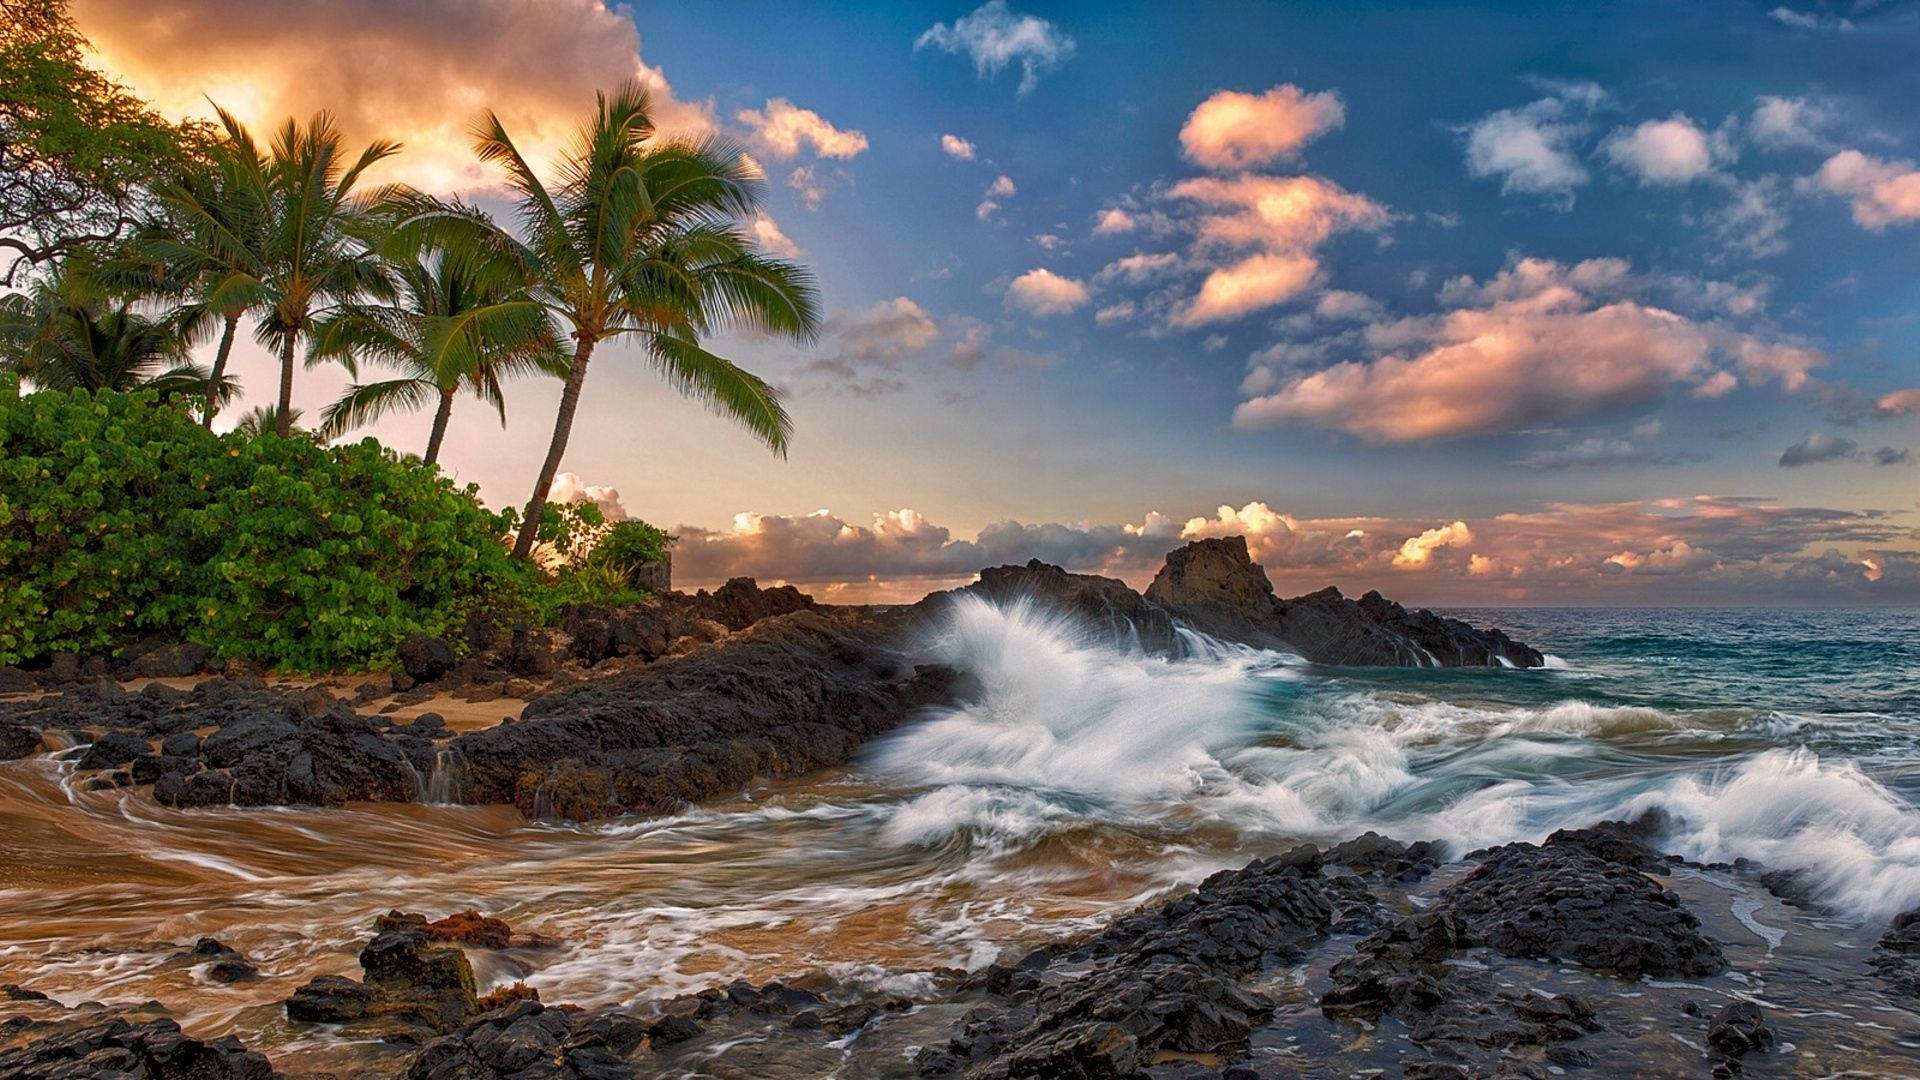 Enjoy the spectacular beauty and natural landscapes of Hawaii Wallpaper